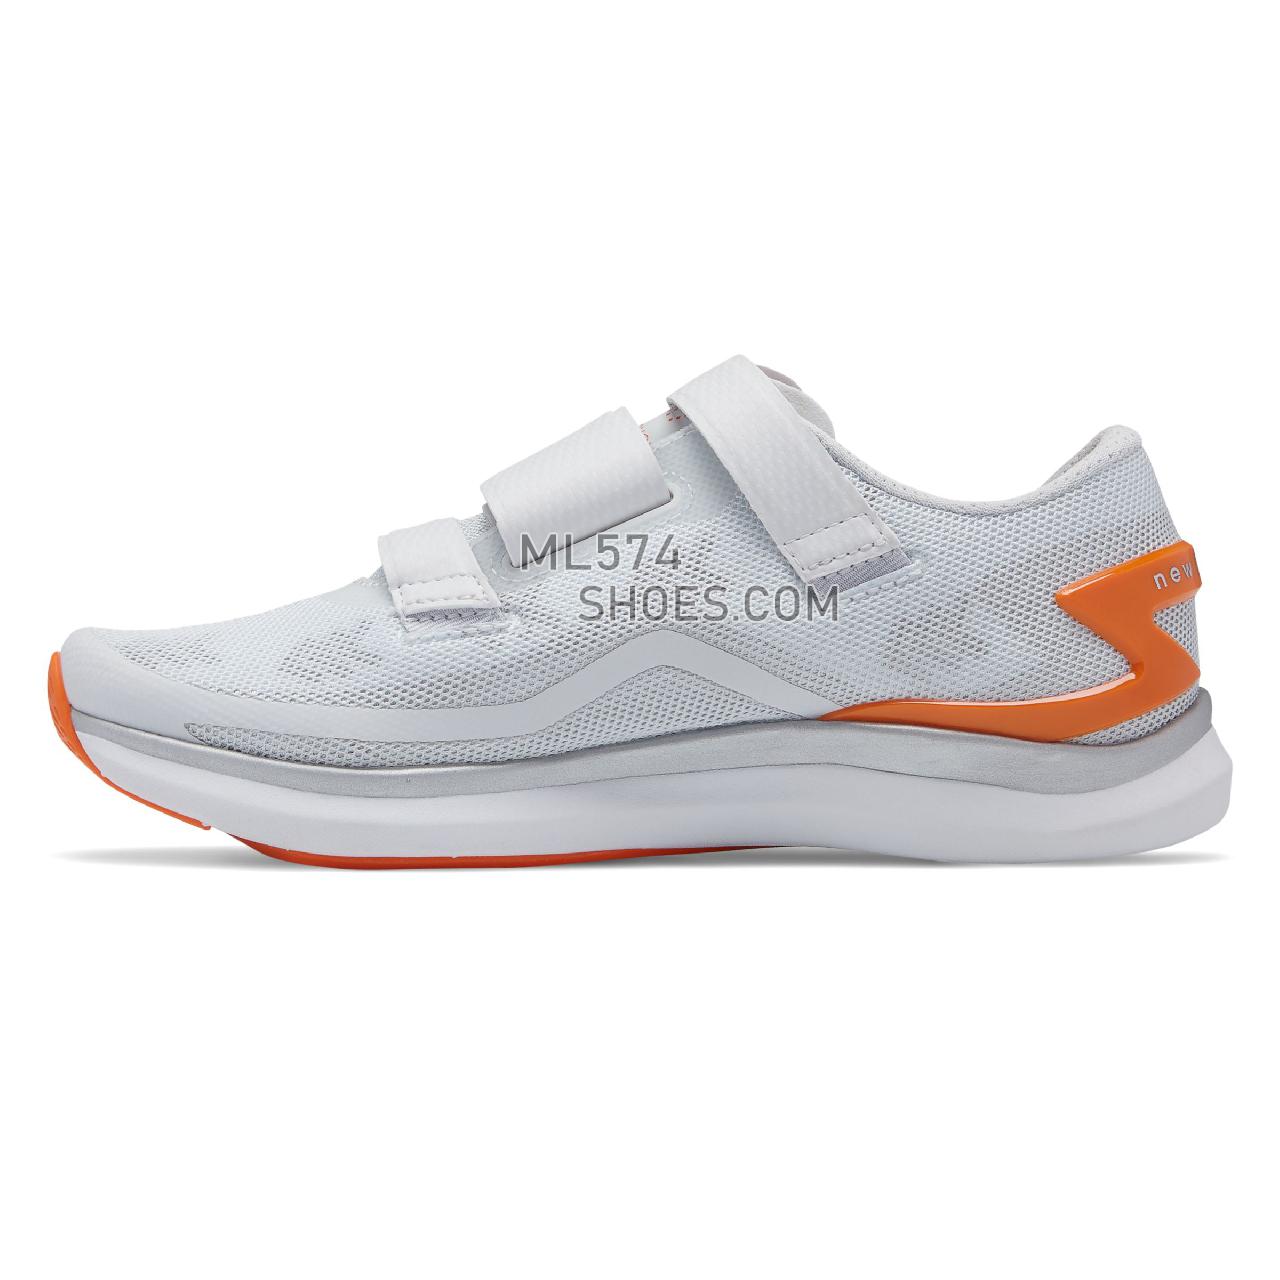 New Balance Cycle for Survival WX09 NBCycle - Women's 09 - X-training Arctic Fox with Orange - WX09CS